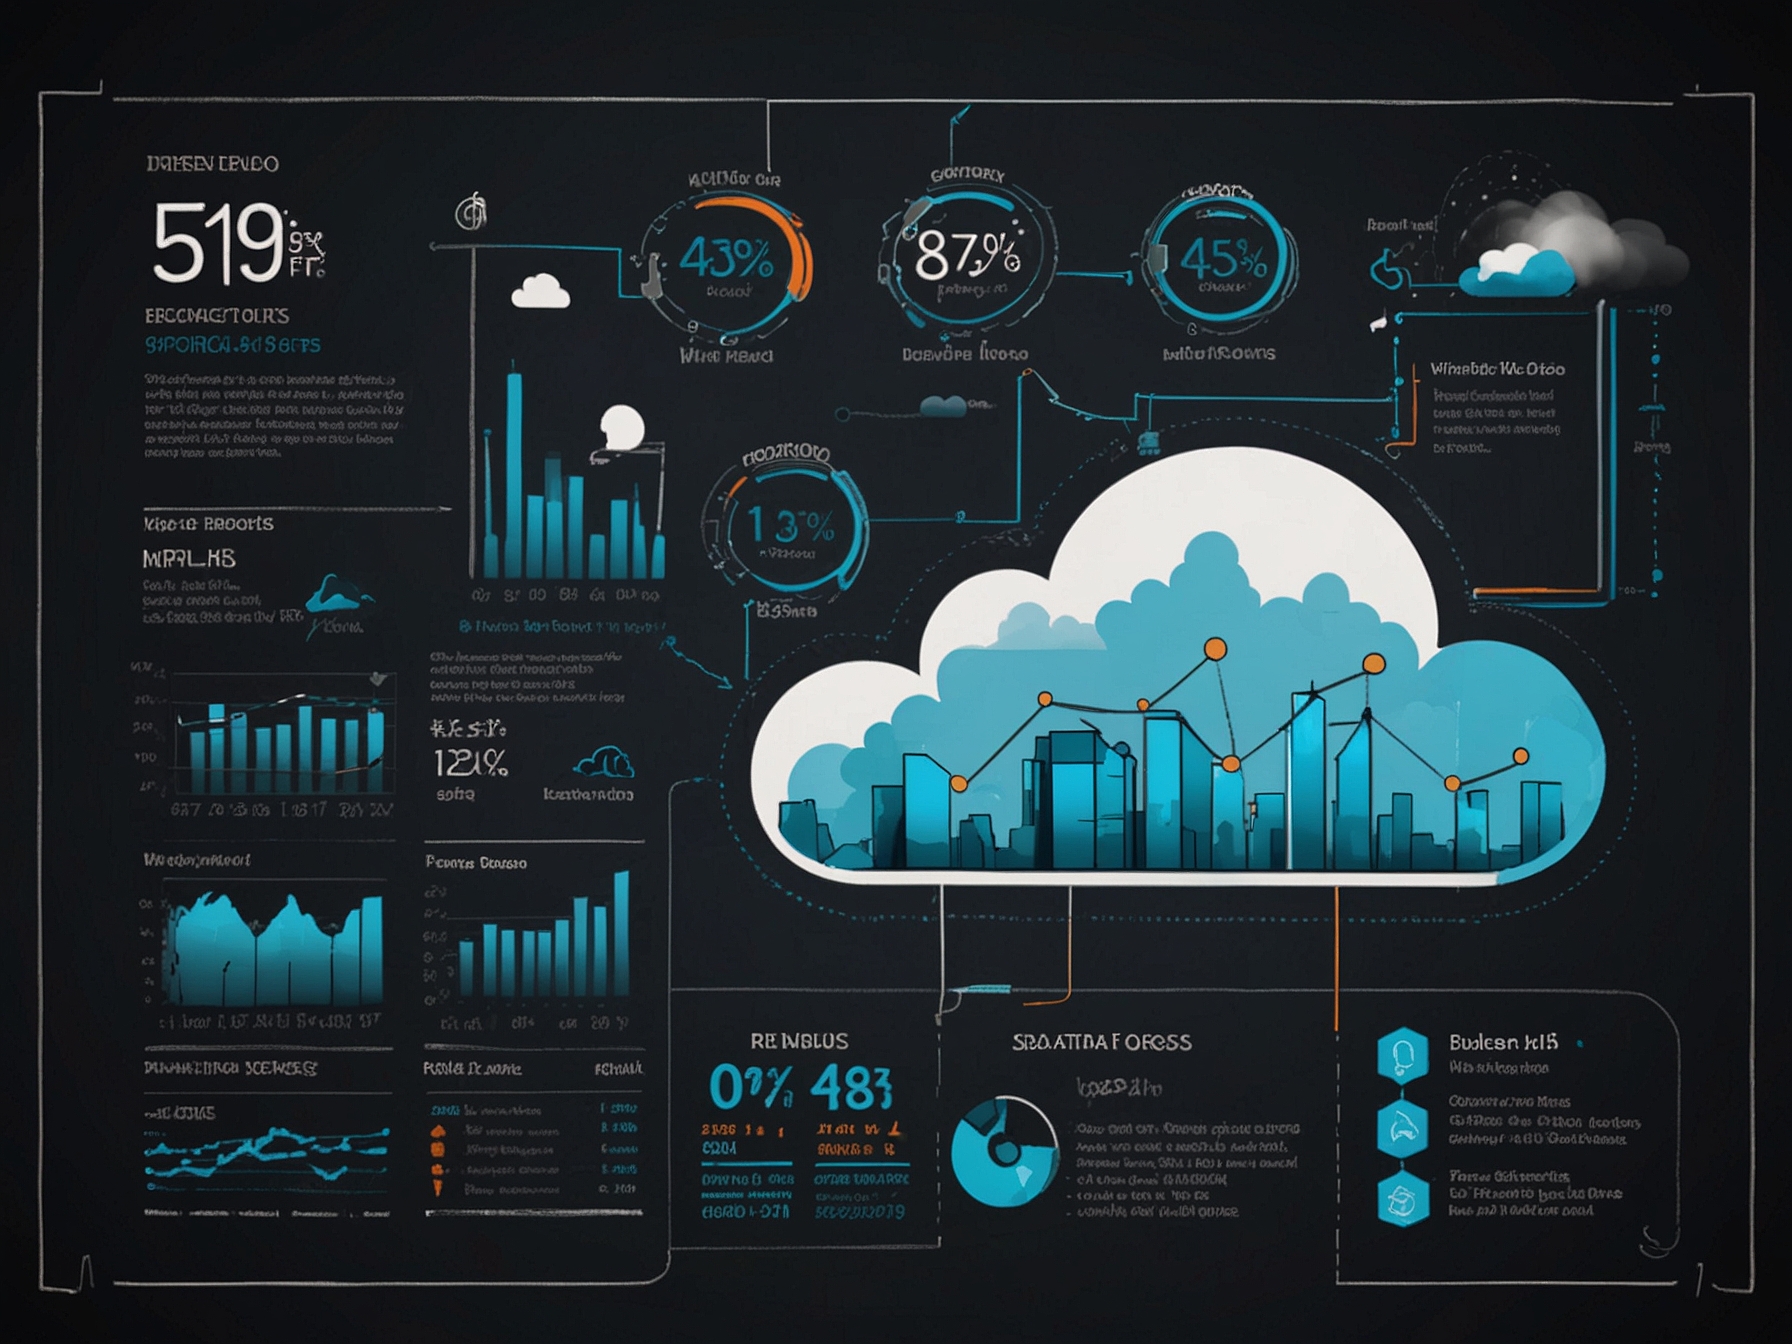 An infographic displaying the expanding market reach and financial strength of a leading cloud services provider, highlighting its key products and strategic business growth.